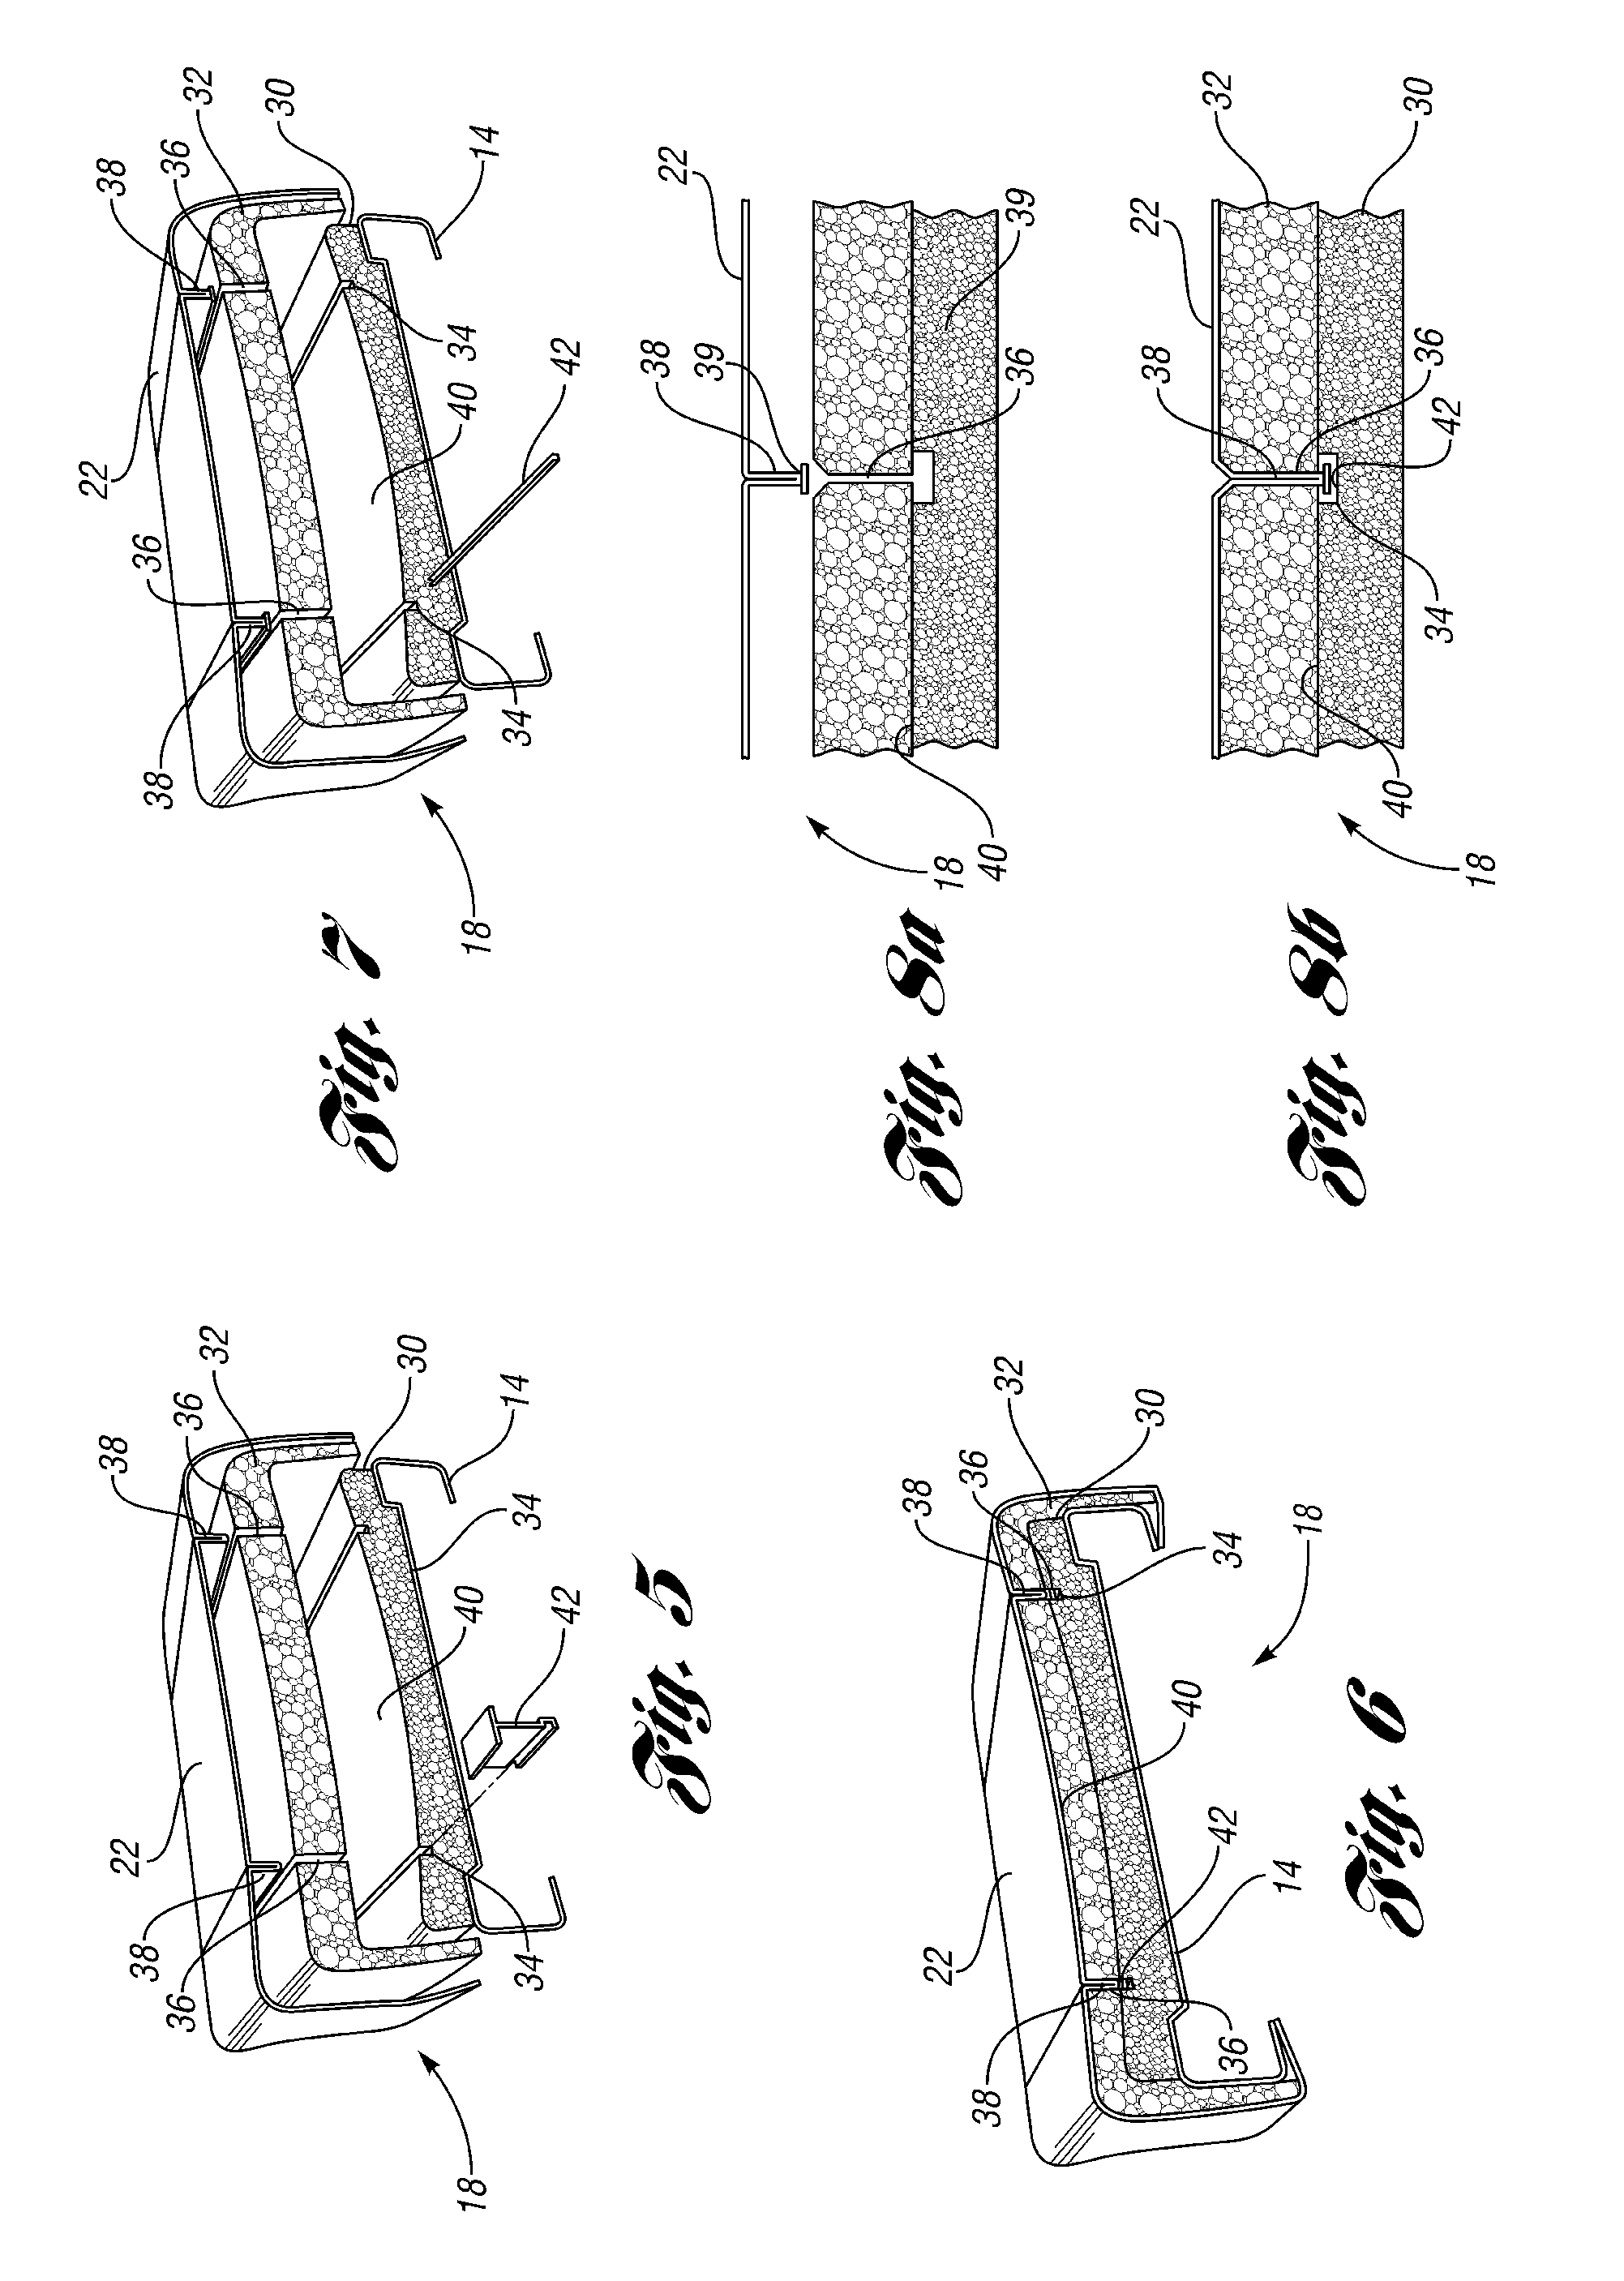 Layered seating system with attachments